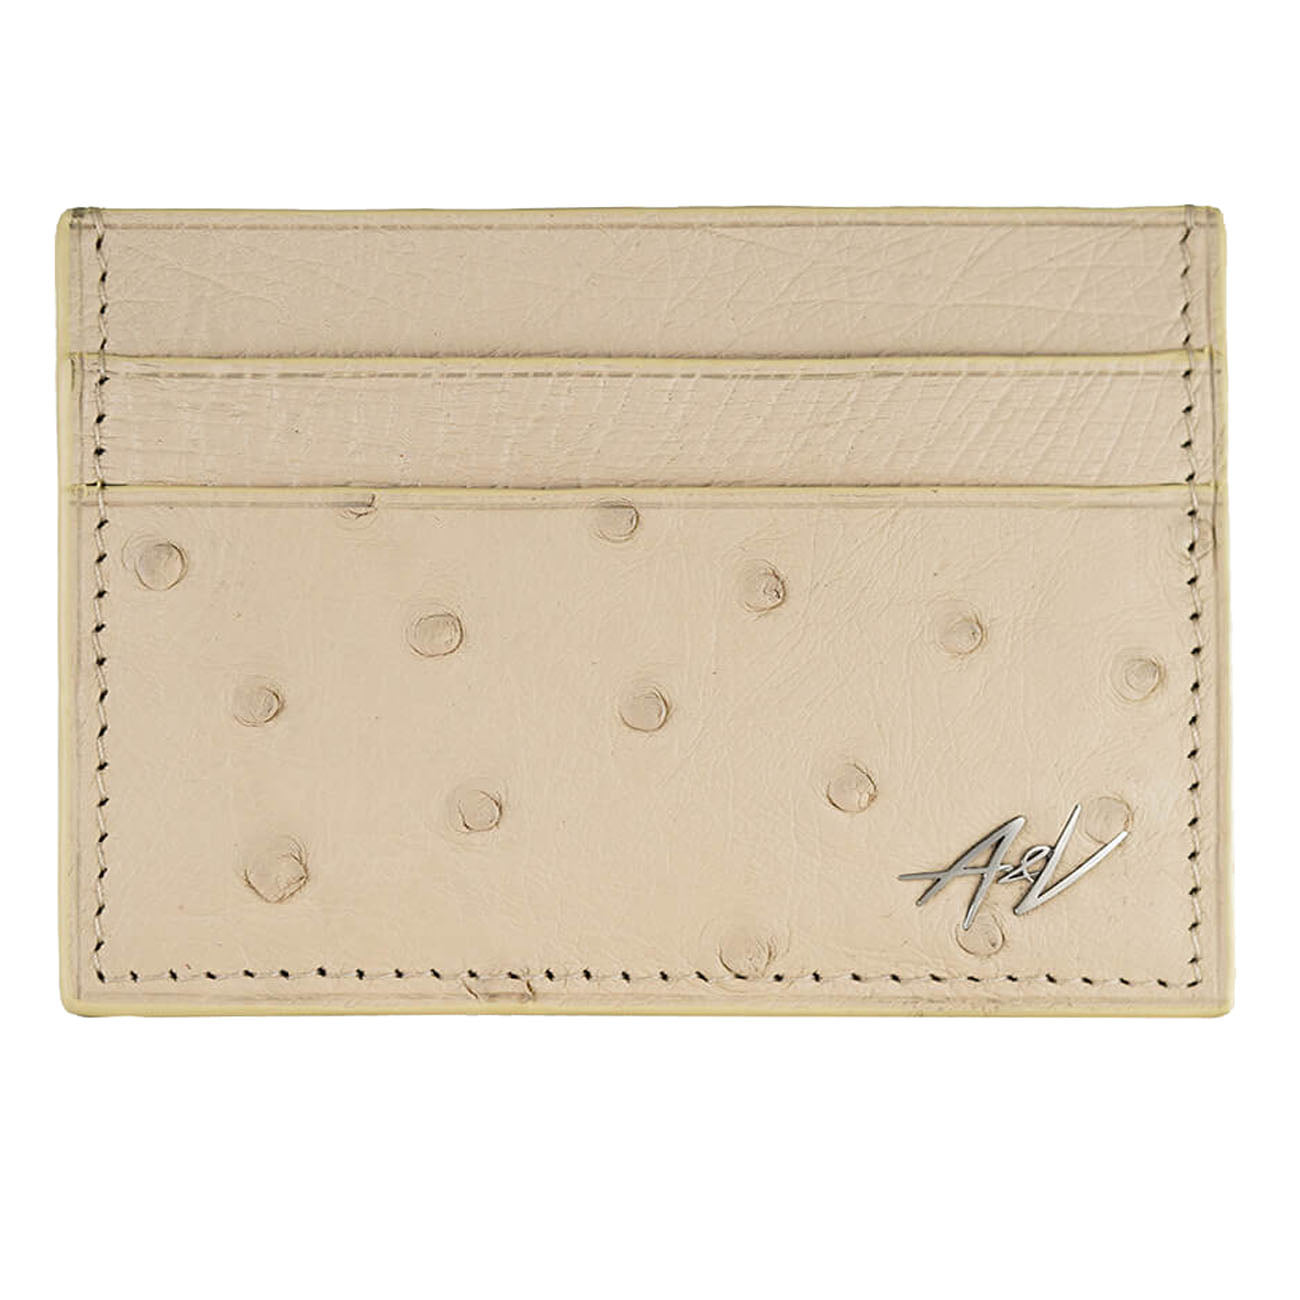 CARD HOLDER OSTRICH LEATHER SECLUDED BEACH